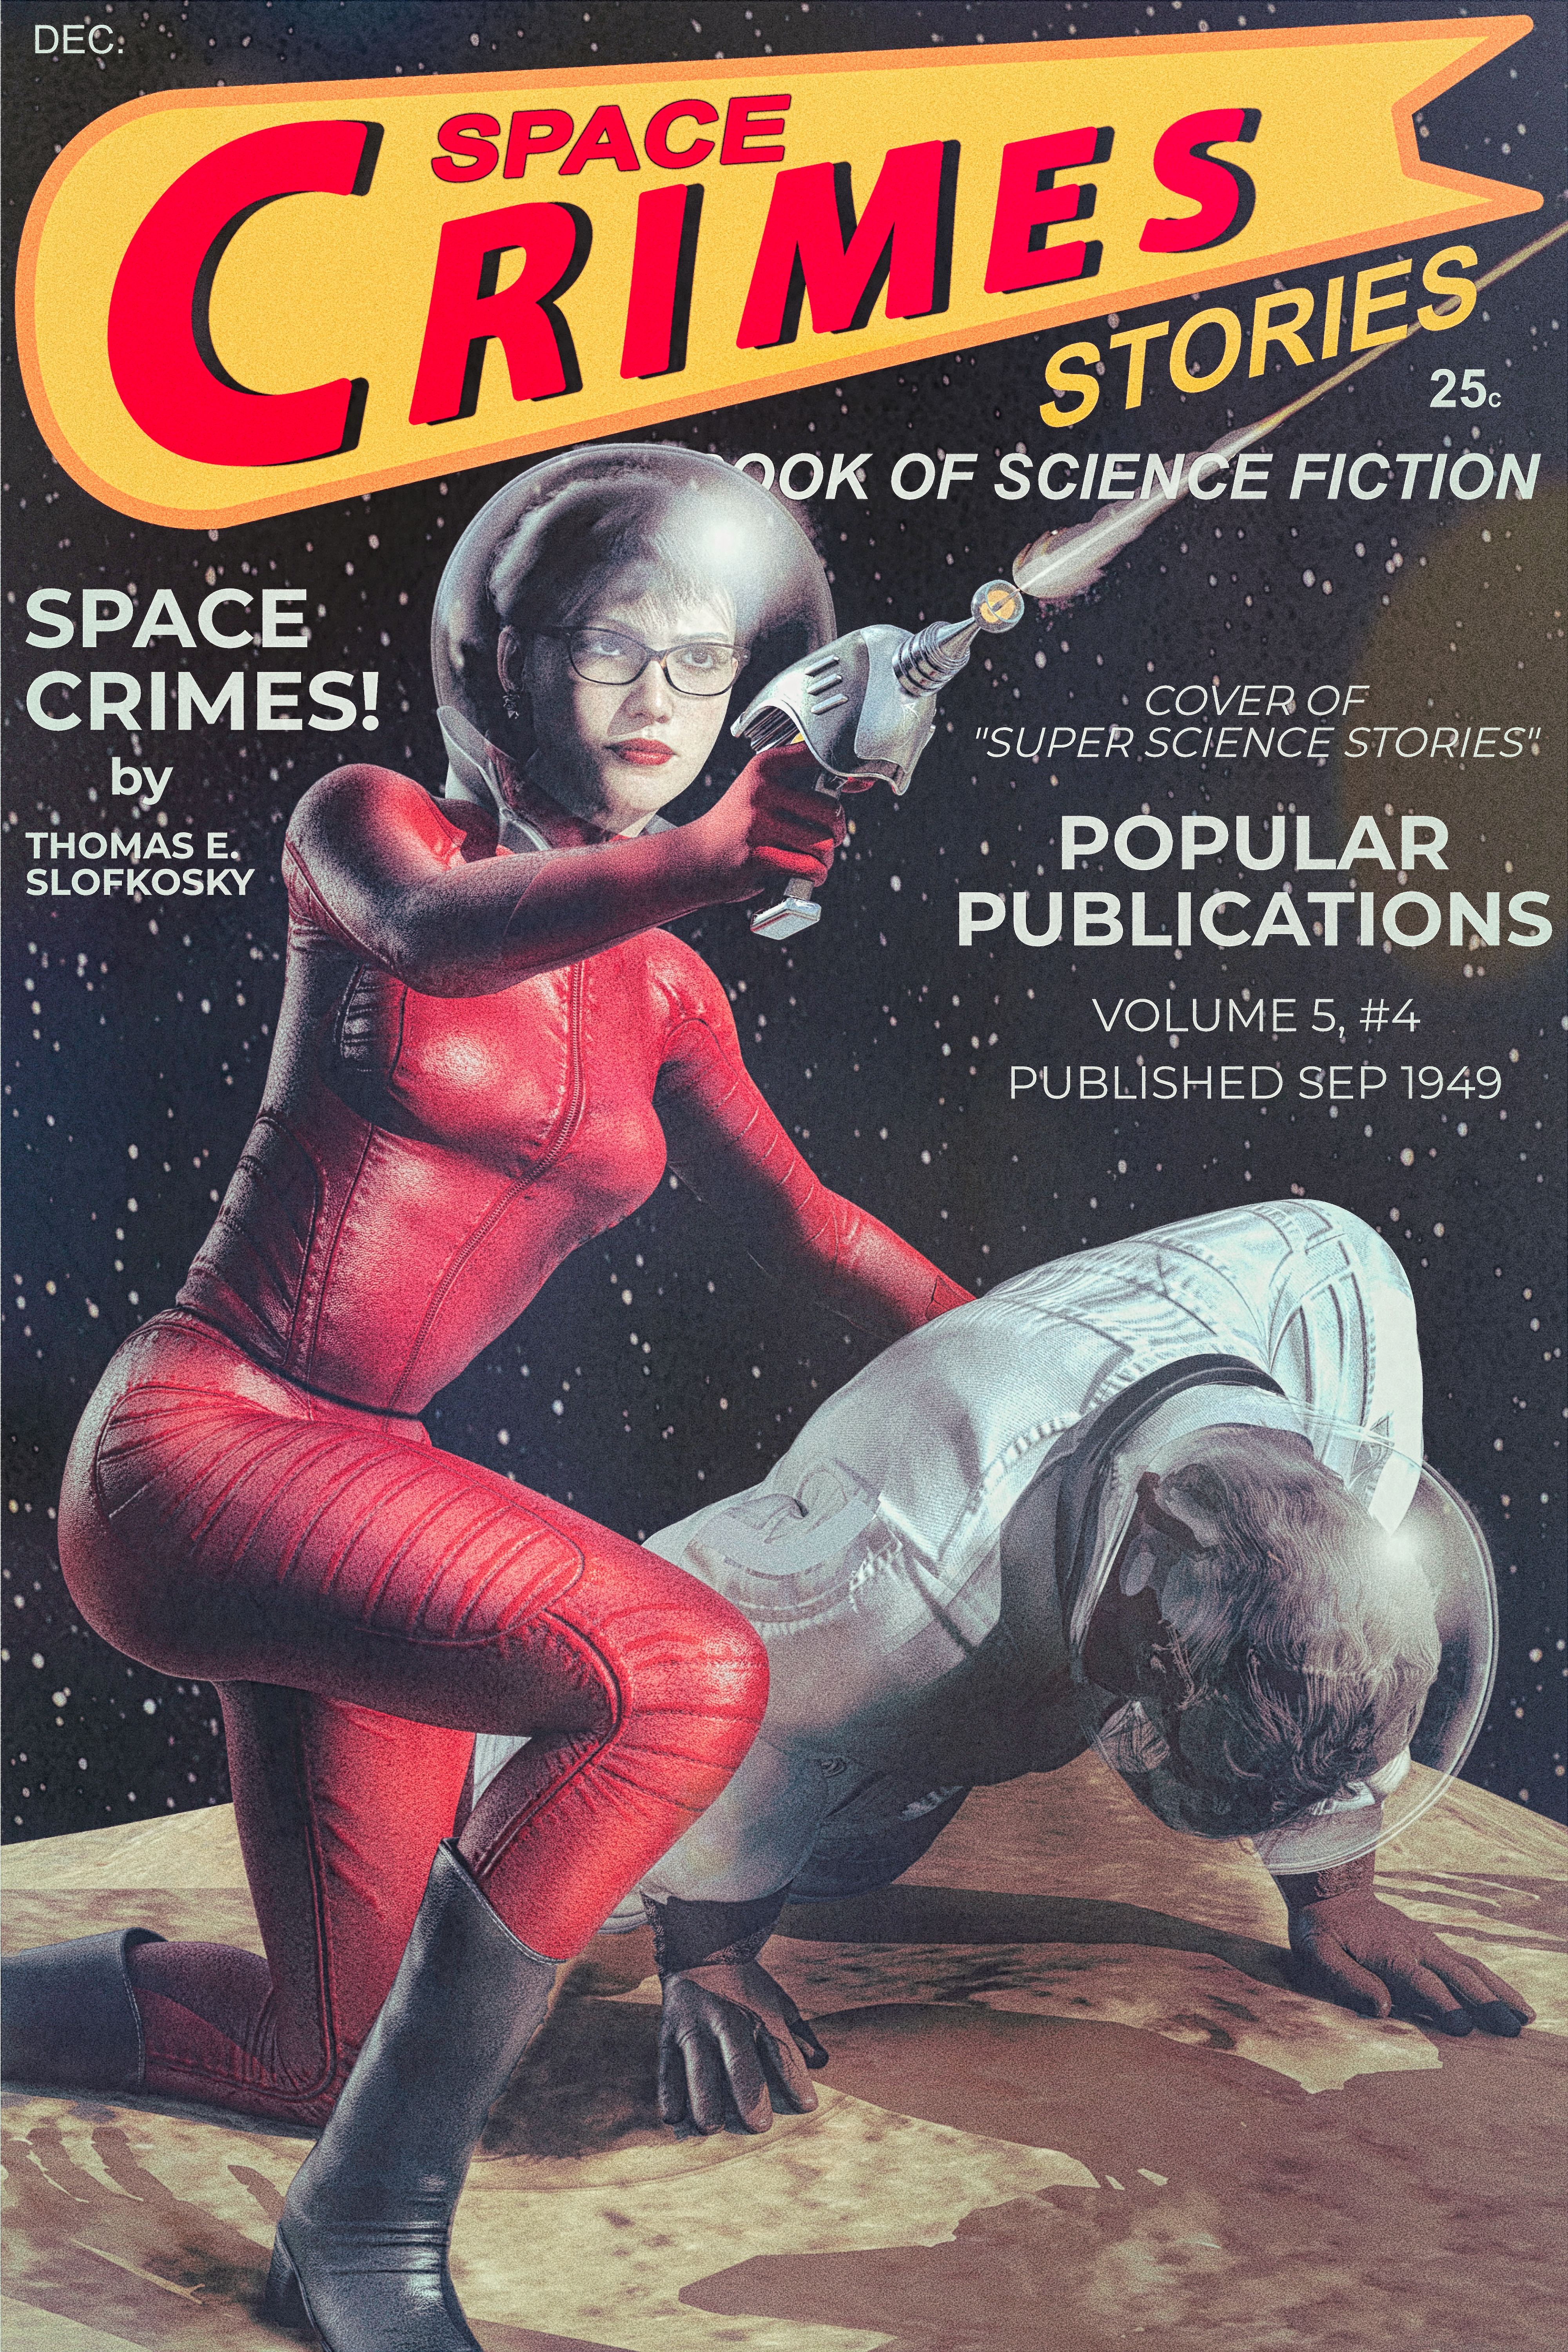 Space Crimes - Remake of Super Science Stories